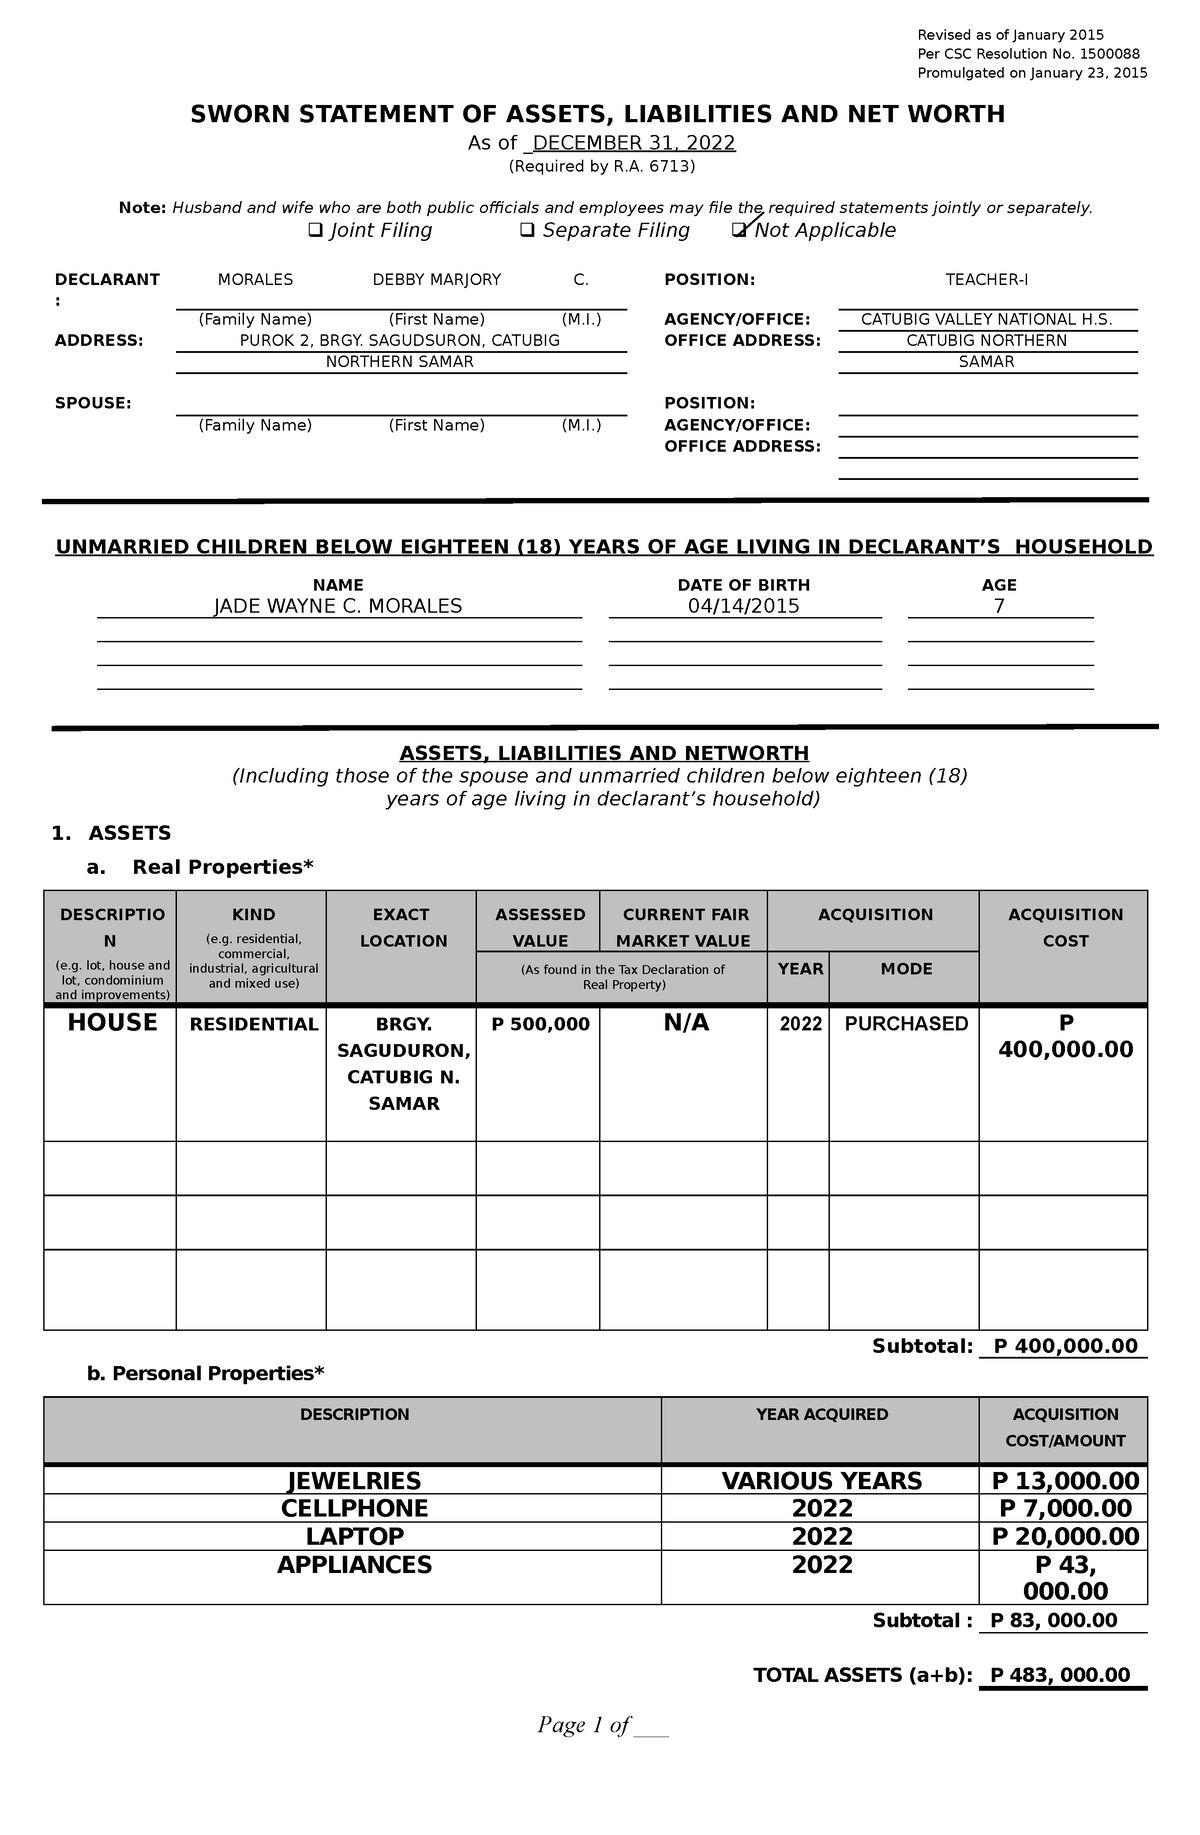 2015 SALN Form - example of saln - Revised as of January 2015 Per CSC ...